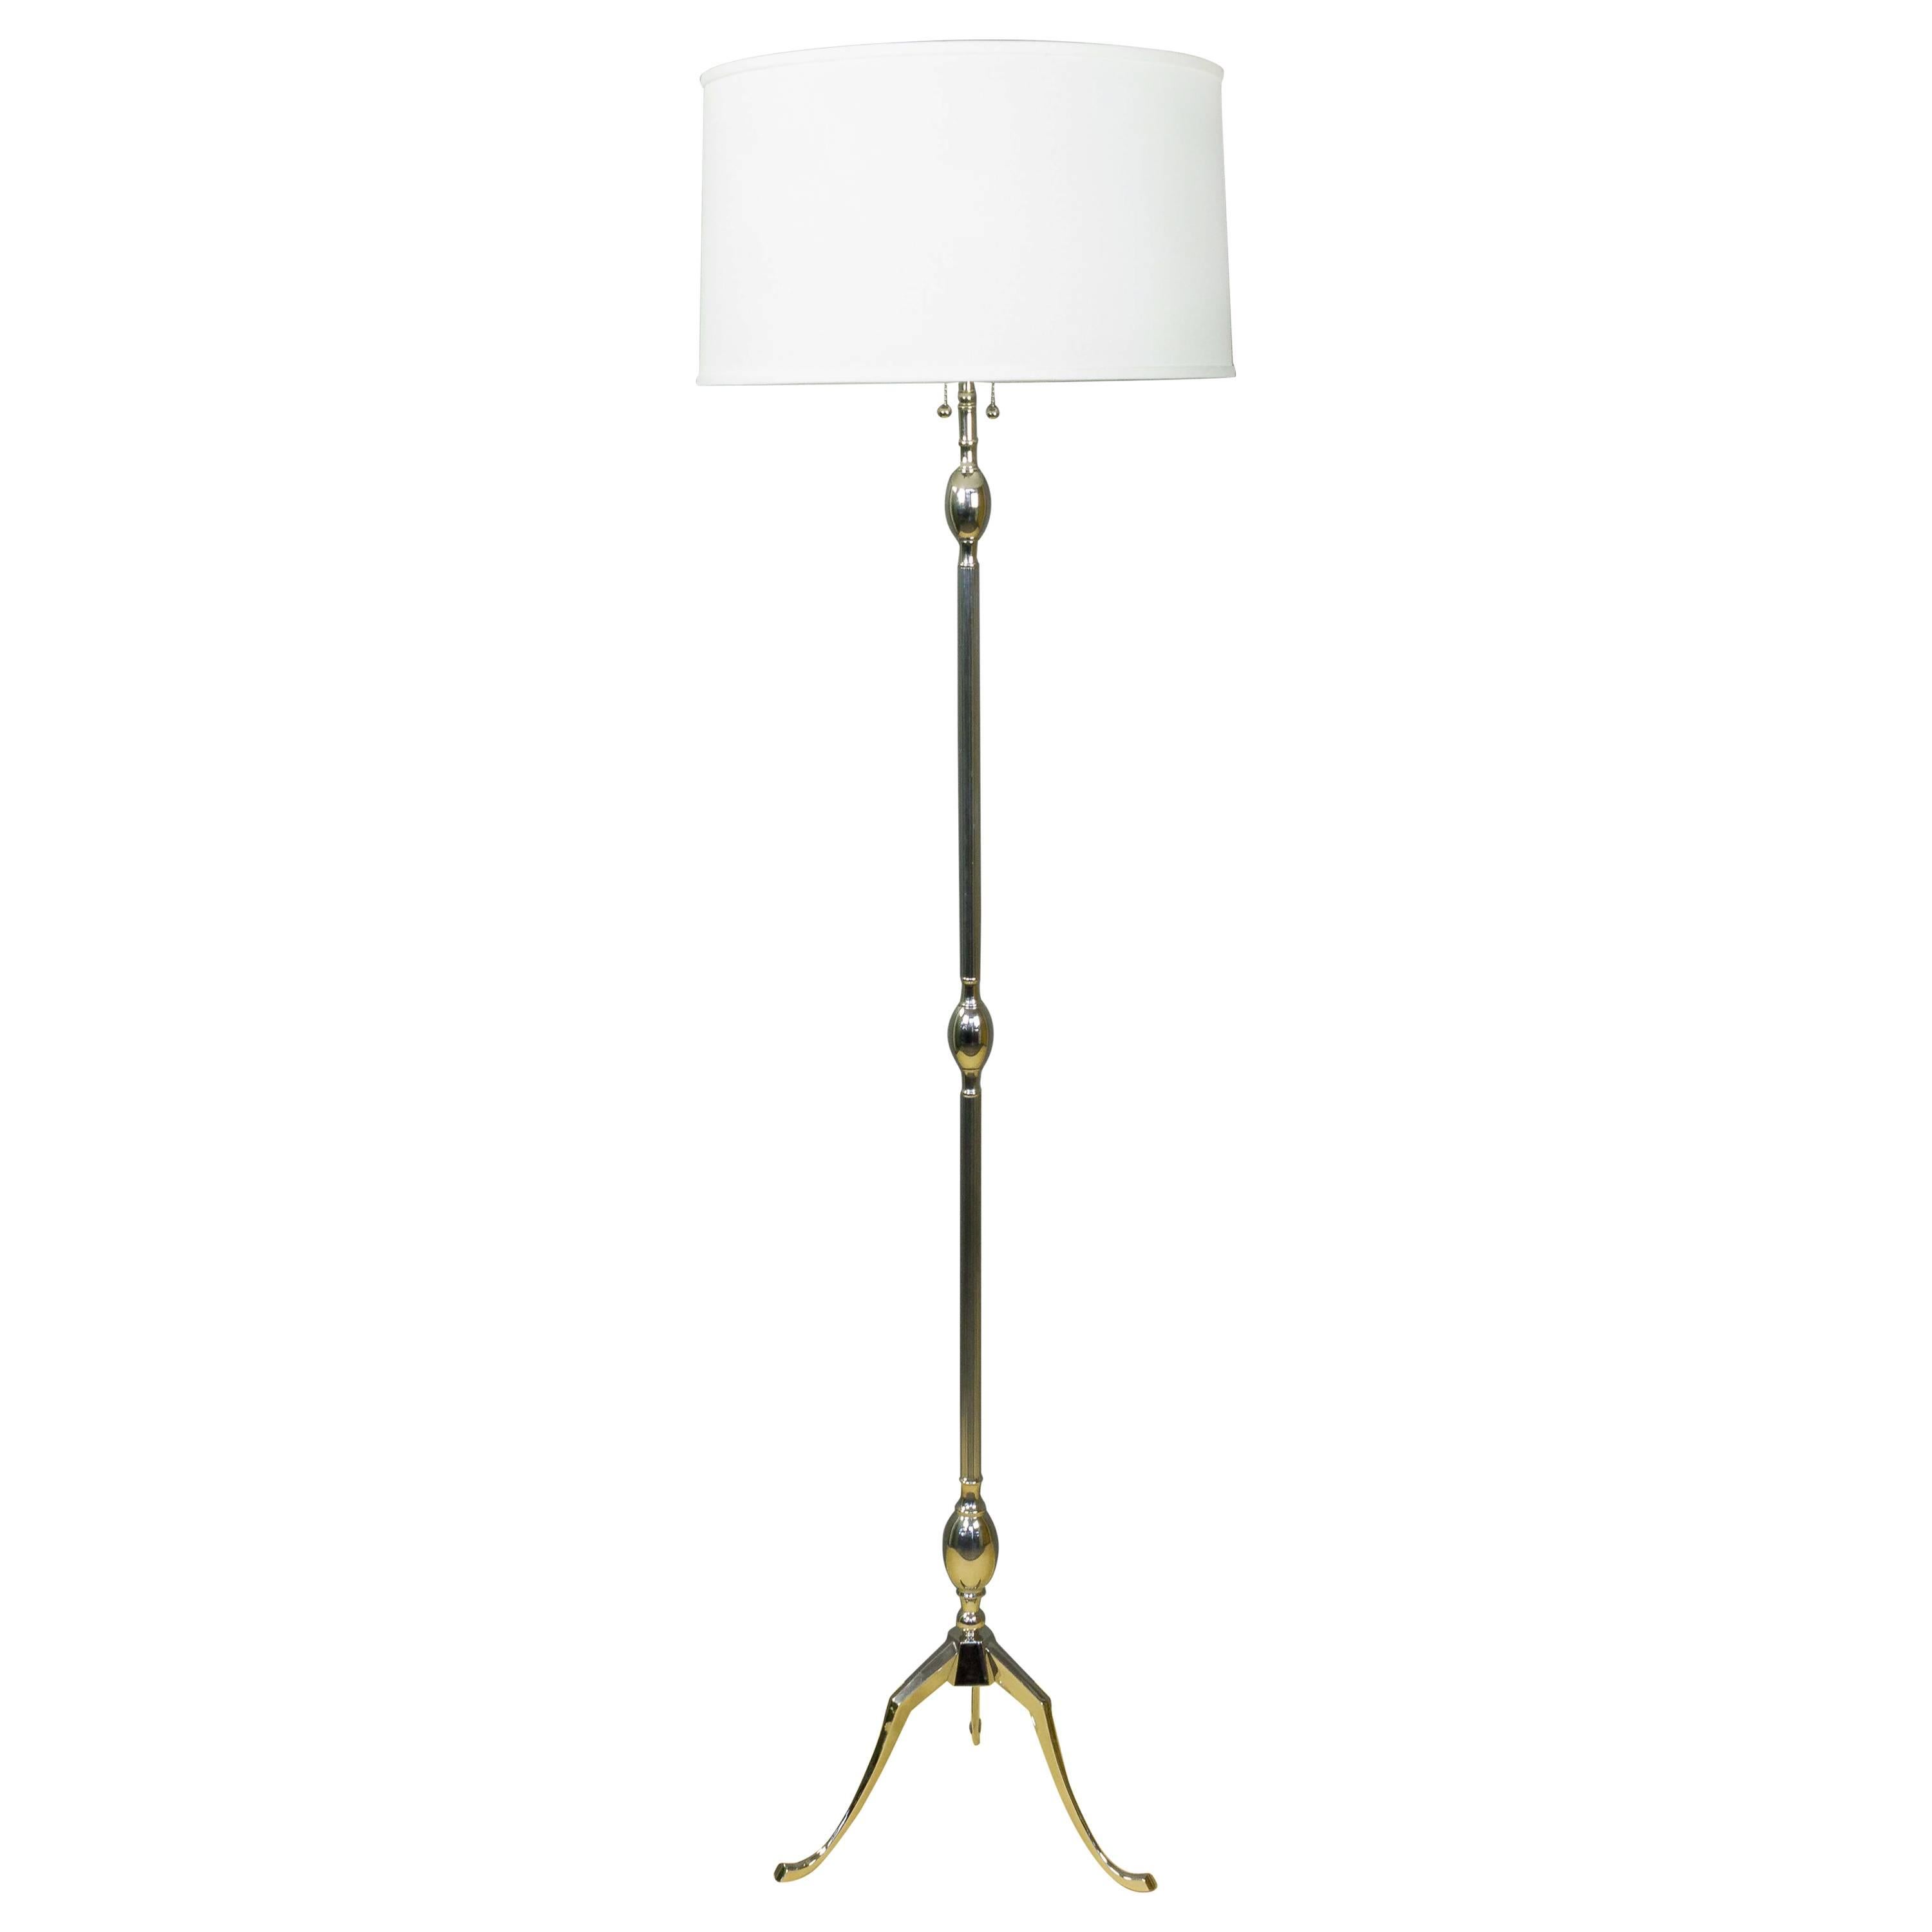 1940s French Nickel-Plated Floor Lamp with a Tripod Base